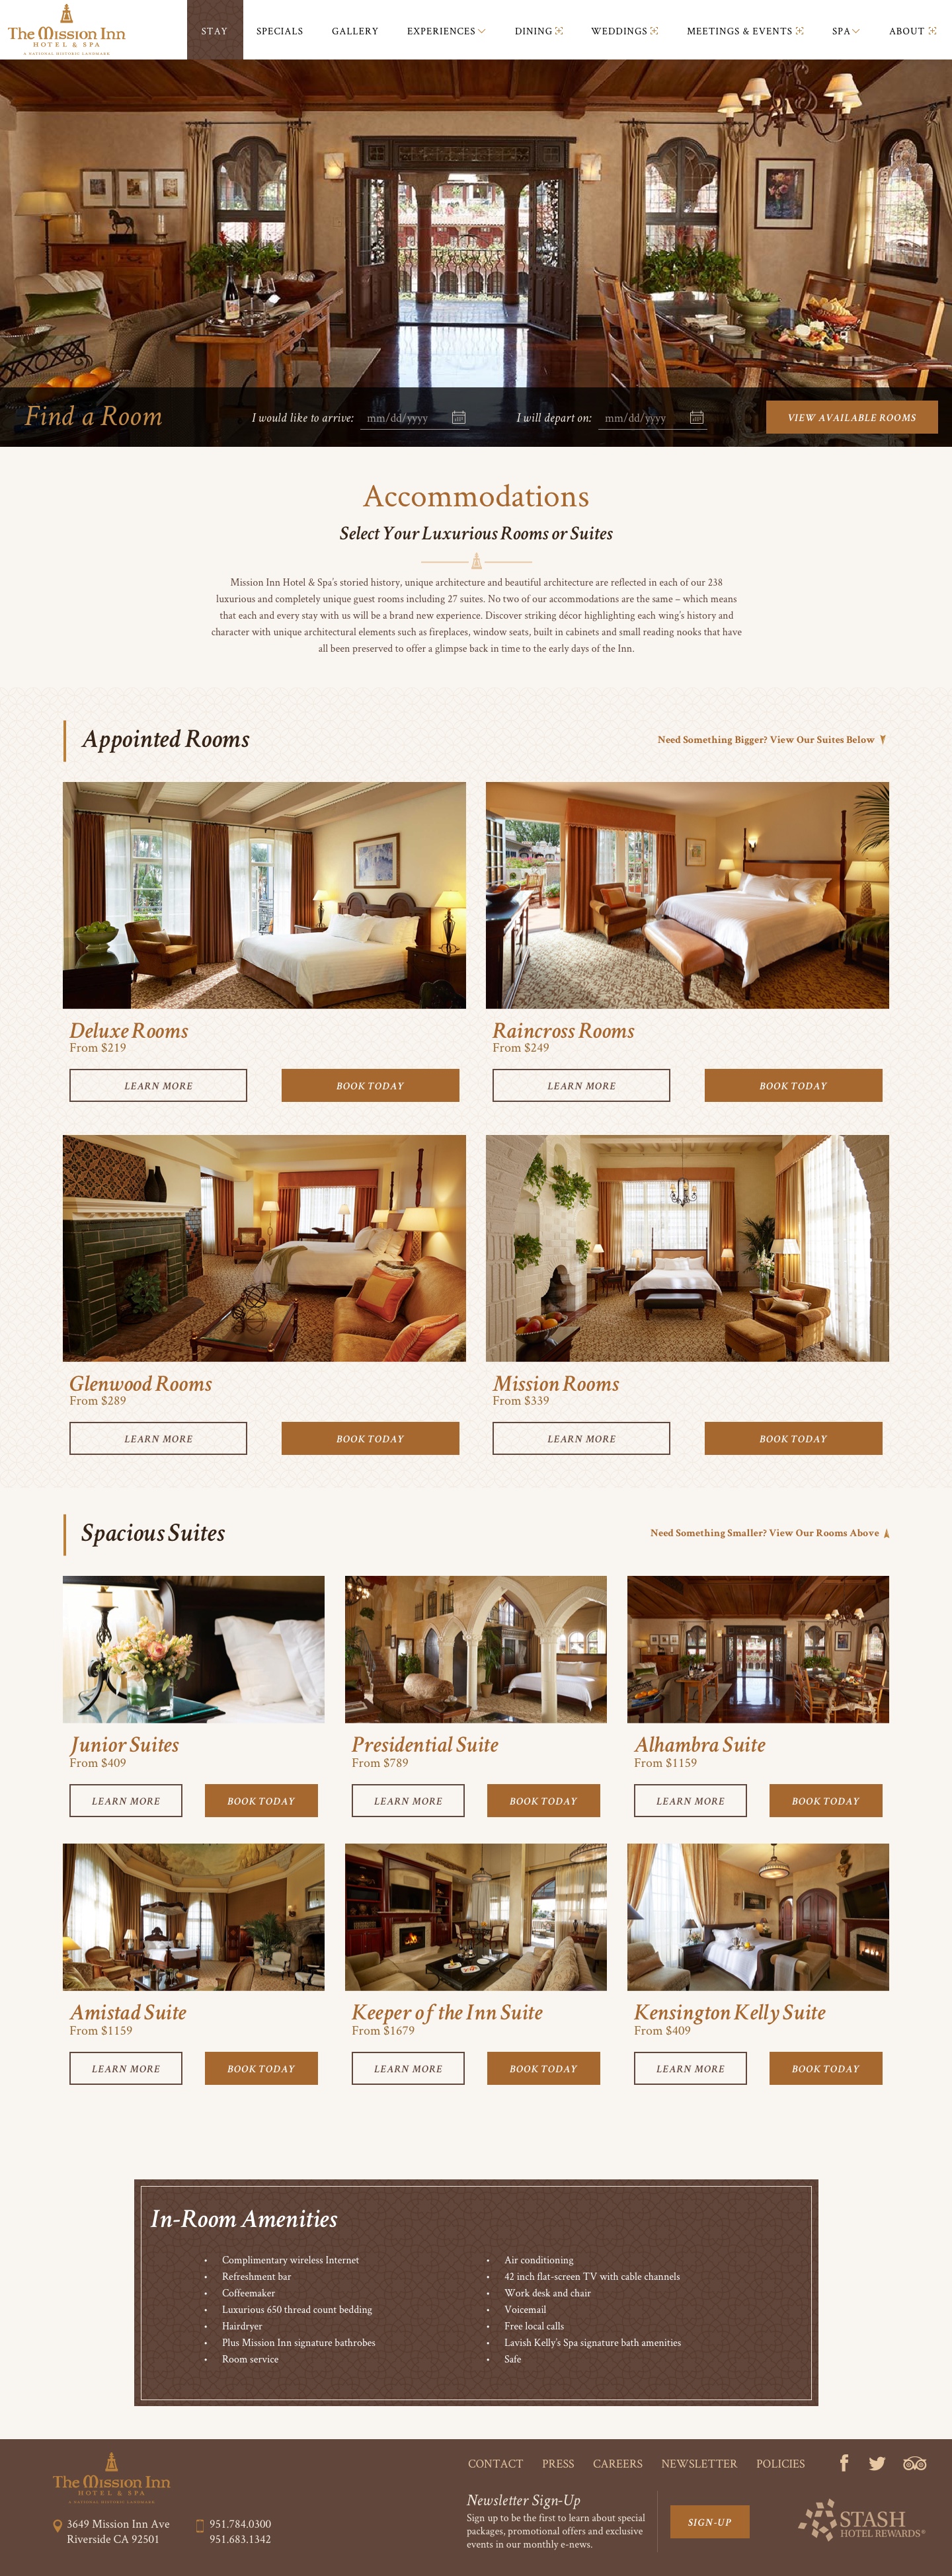 Mission Inn Hotel & Spa - Accommodations Page Design